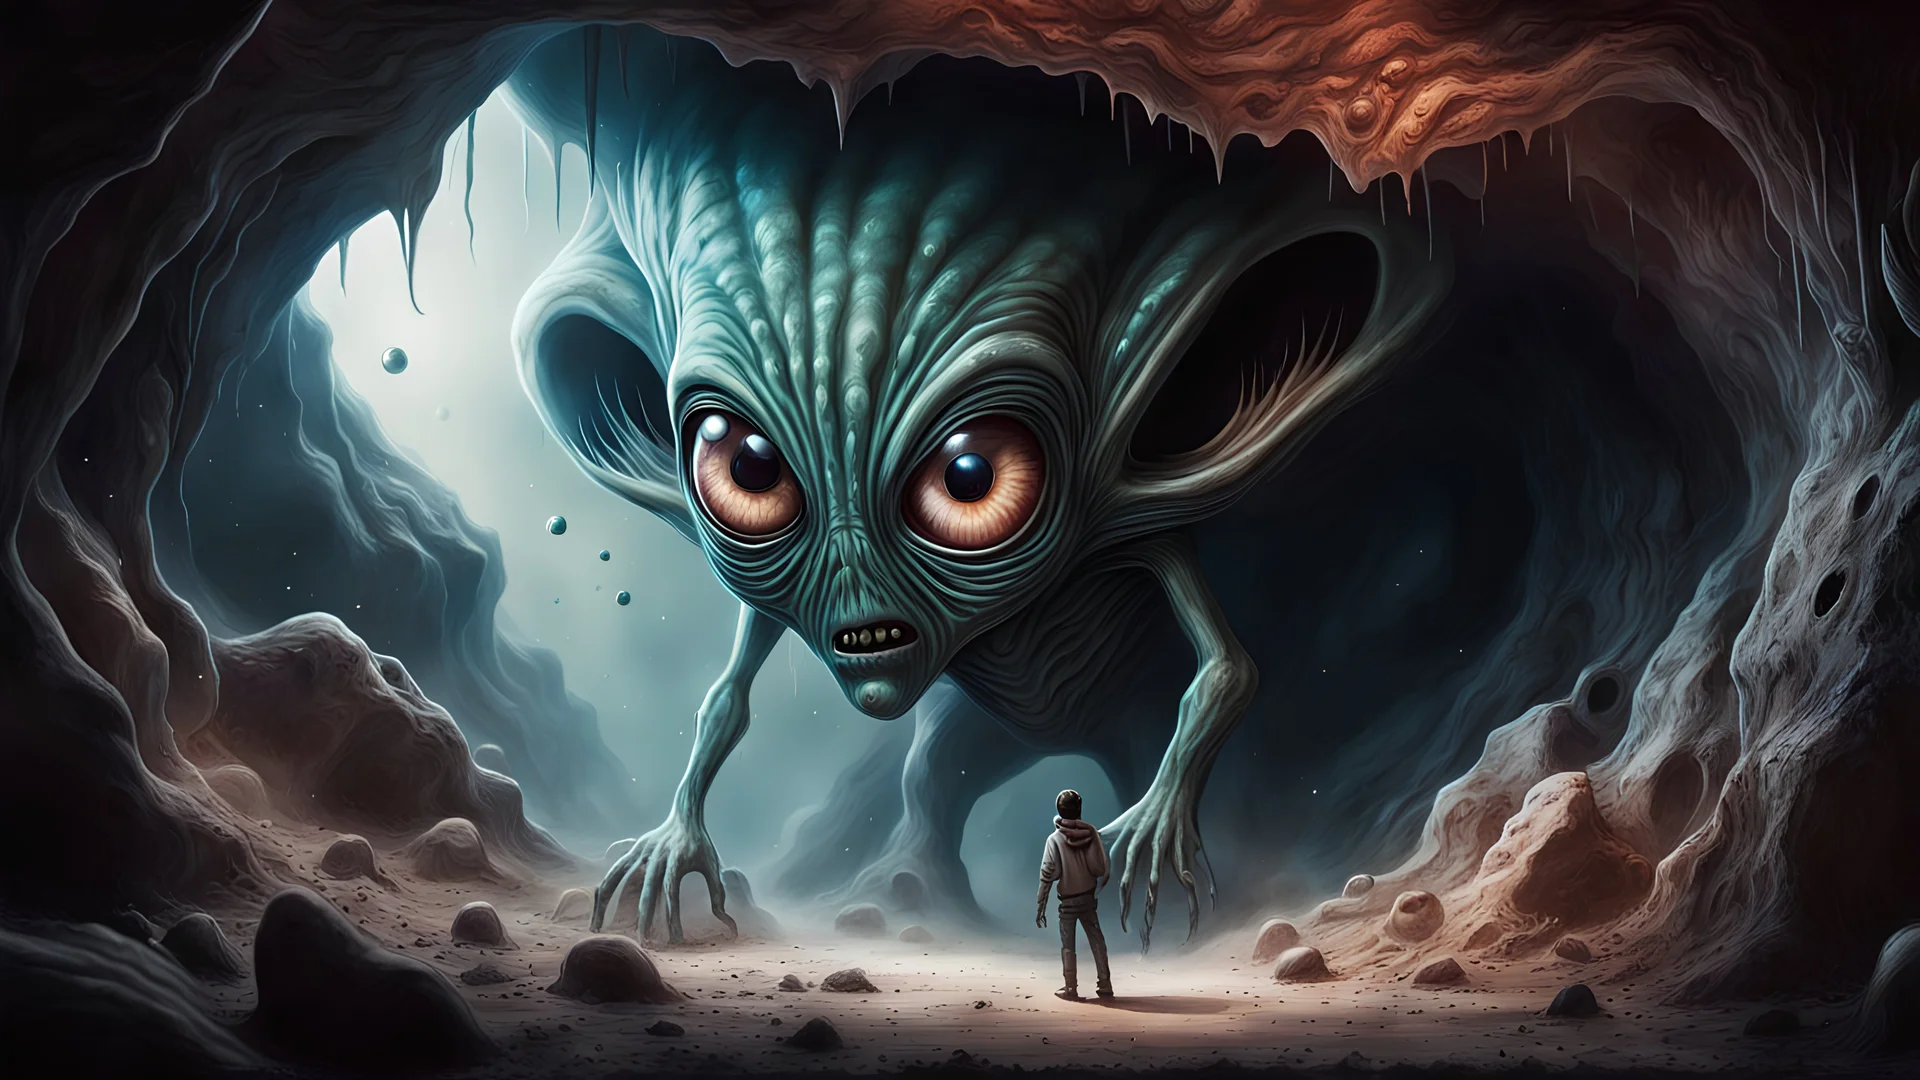 A realistic airbrush illustration of an alien environment with a scary, evil creature with extremely detailed and oversized eyes looking into a large cave, 🌜, ✨, splatter, science fiction, fantasy, phenomena, supernatural, nikon80d, no grain